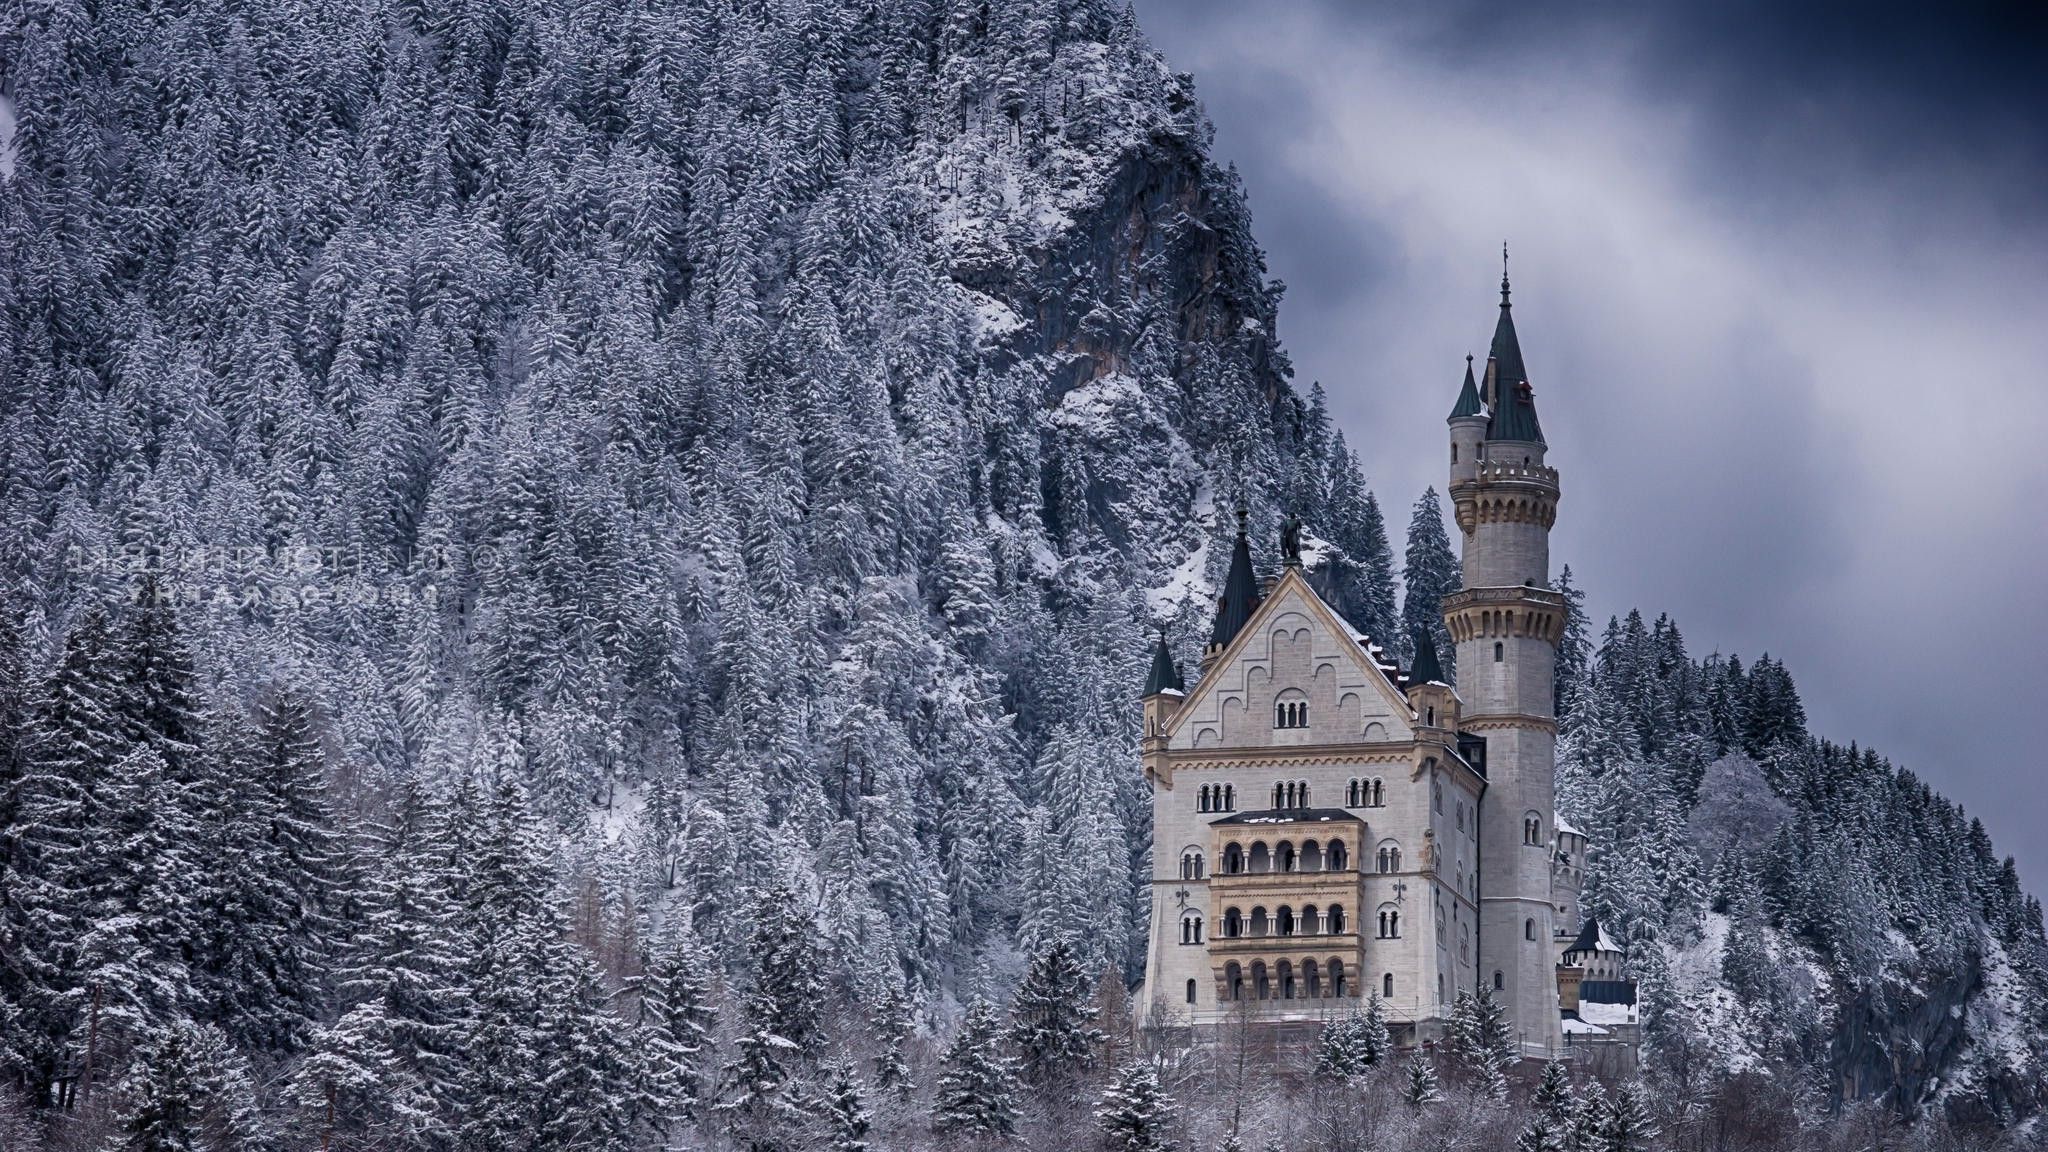 nature, Landscape, Winter, Snow, Architecture, Castle, Tower, Trees, Forest, Rock, Neuschwanstein Castle, Germany, Mountain Wallpaper HD / Desktop and Mobile Background